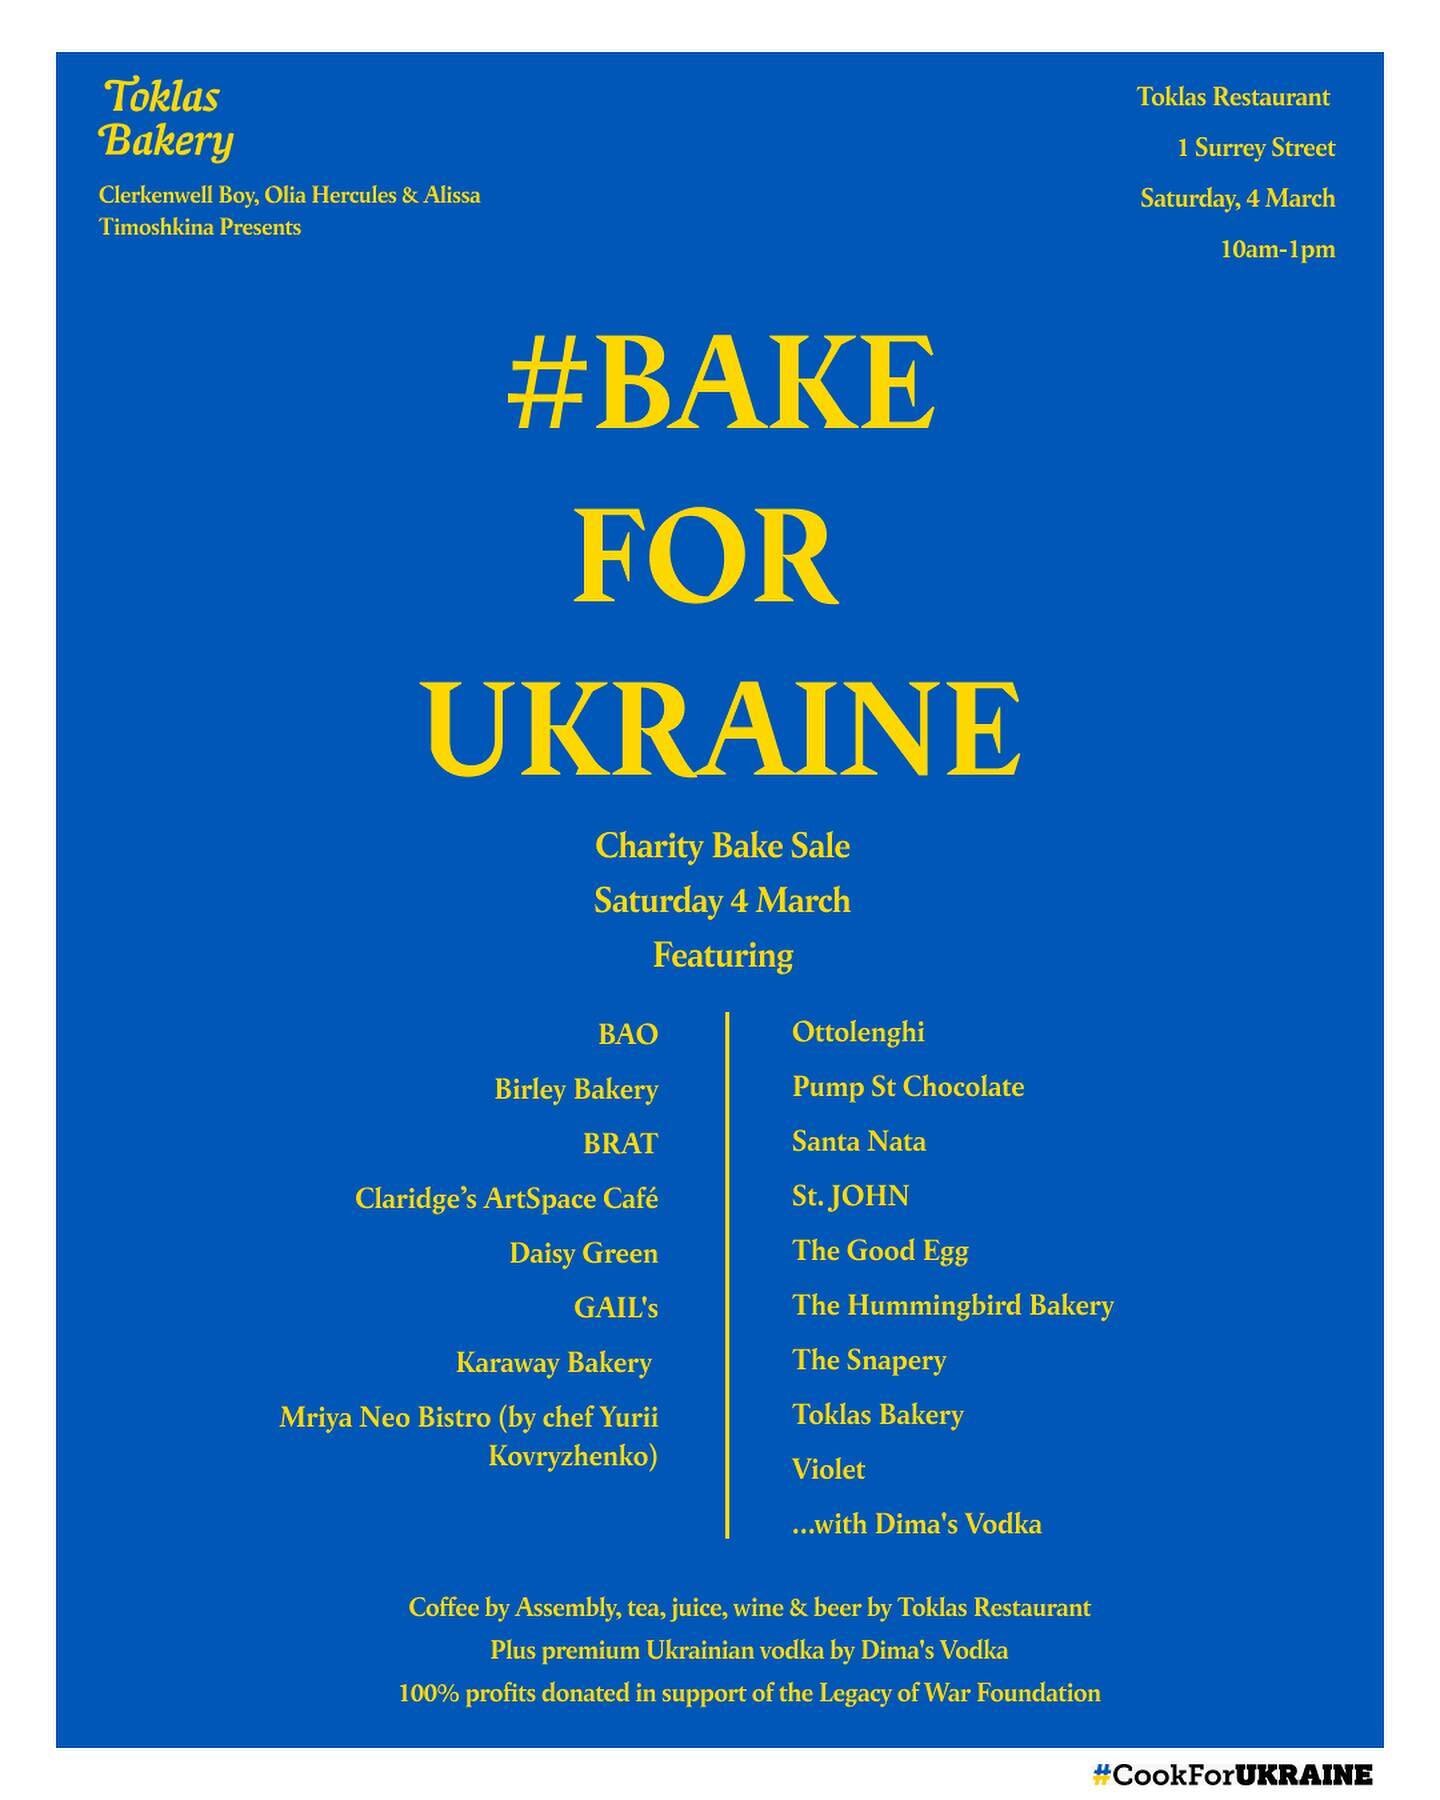 Today #cookforukraine is 1 year old! It&rsquo;s been a year of true kindness, compassion, generosity, community and solidarity! We can&rsquo;t thank you all enough for helping us raise over &pound;2.1M for Ukraine! But until this war is over, we will